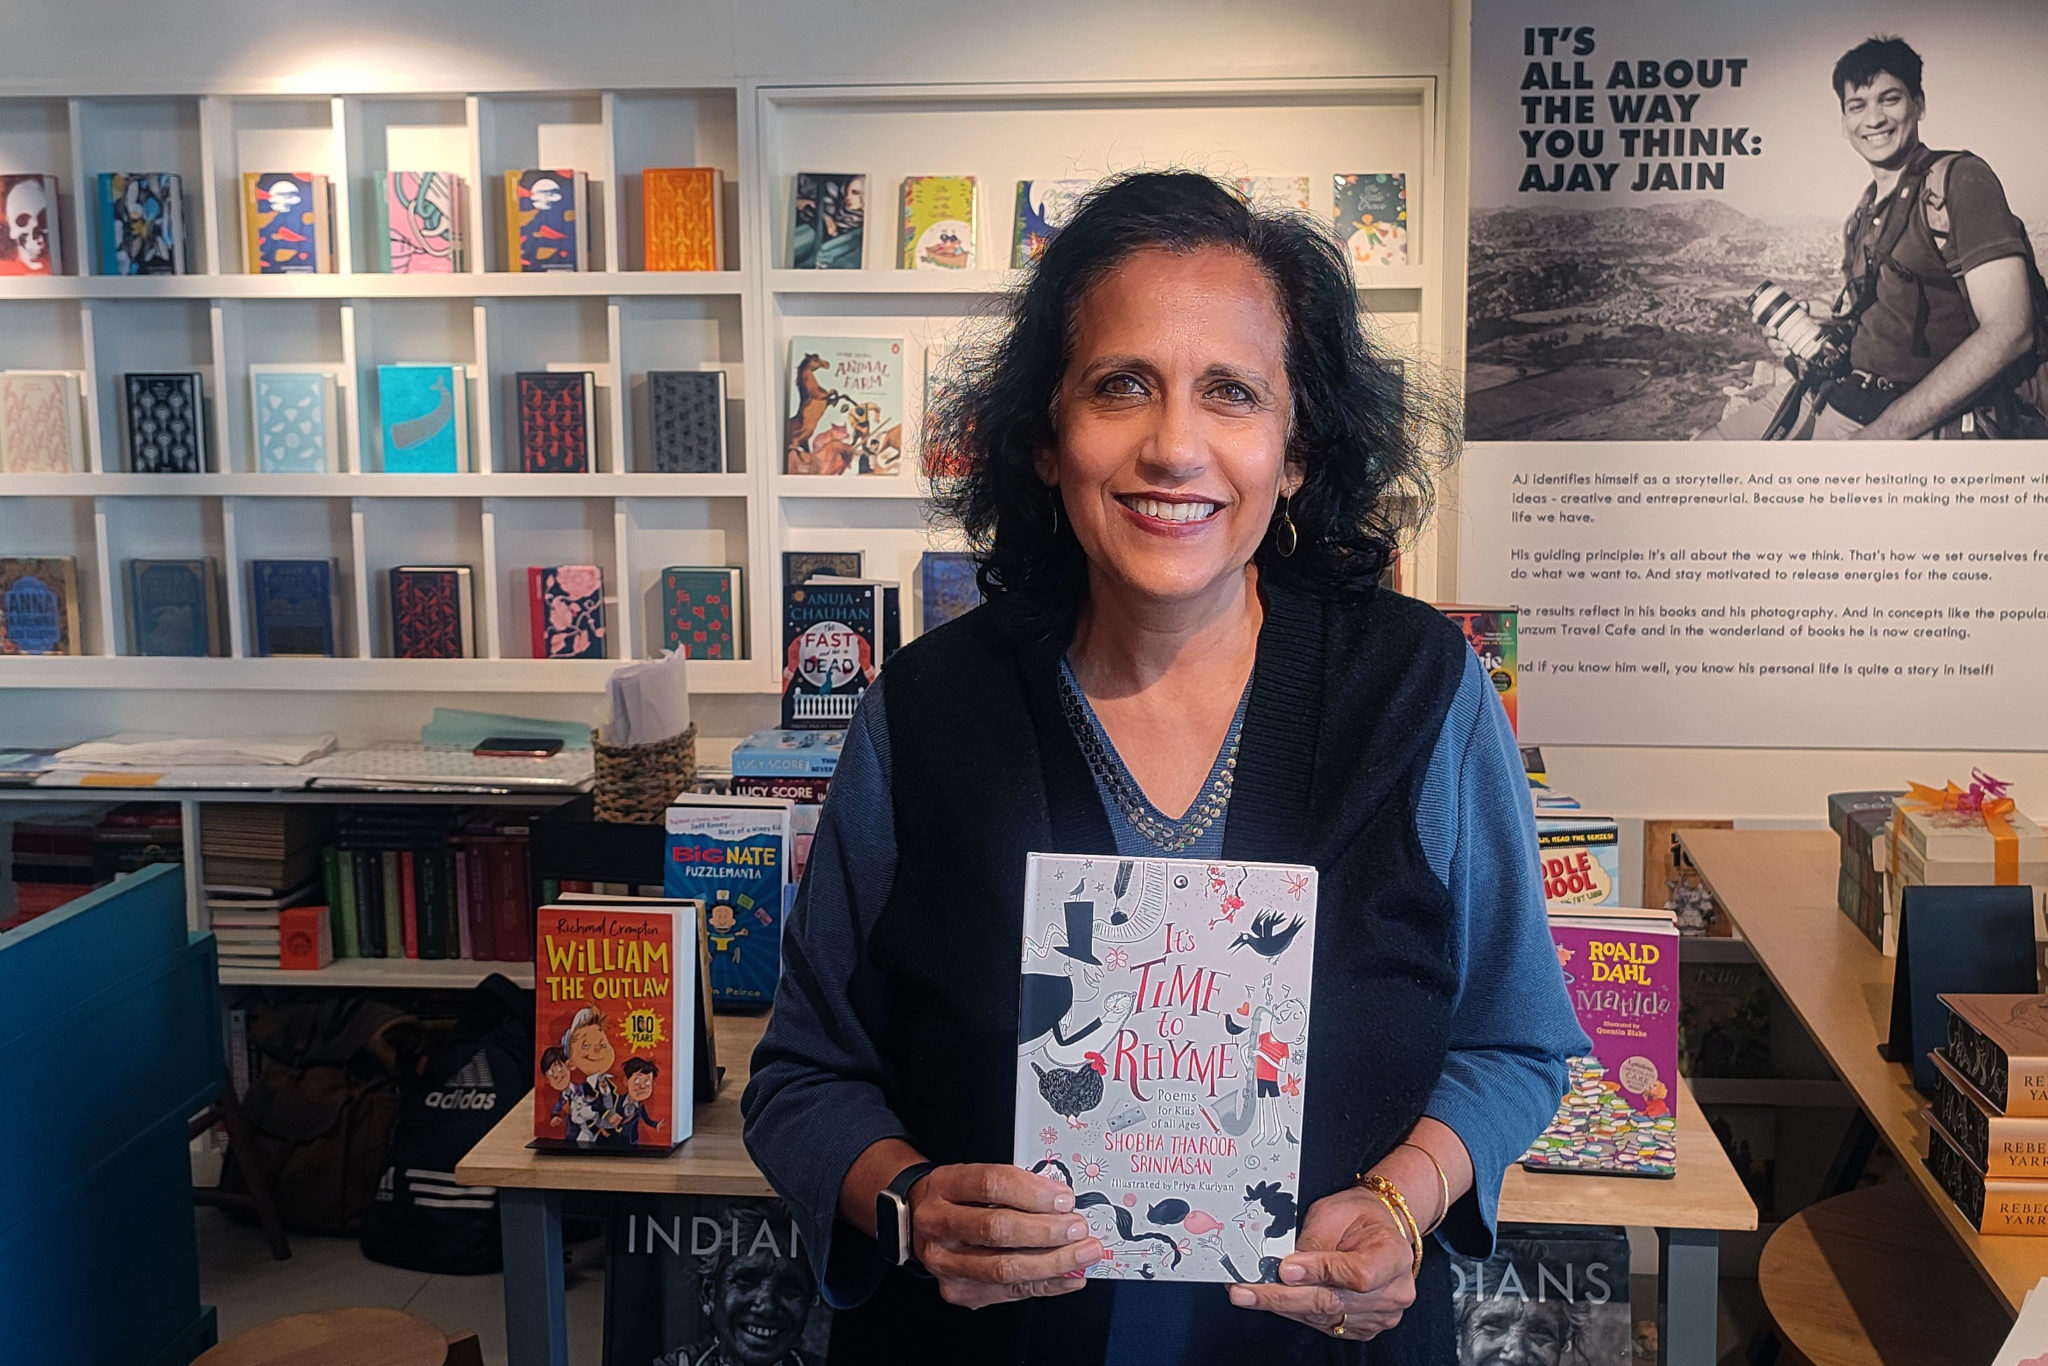 Interview: Our Writing Should Stimulate or Instruct or Entertain, Have Purpose, says Shobha Tharoor